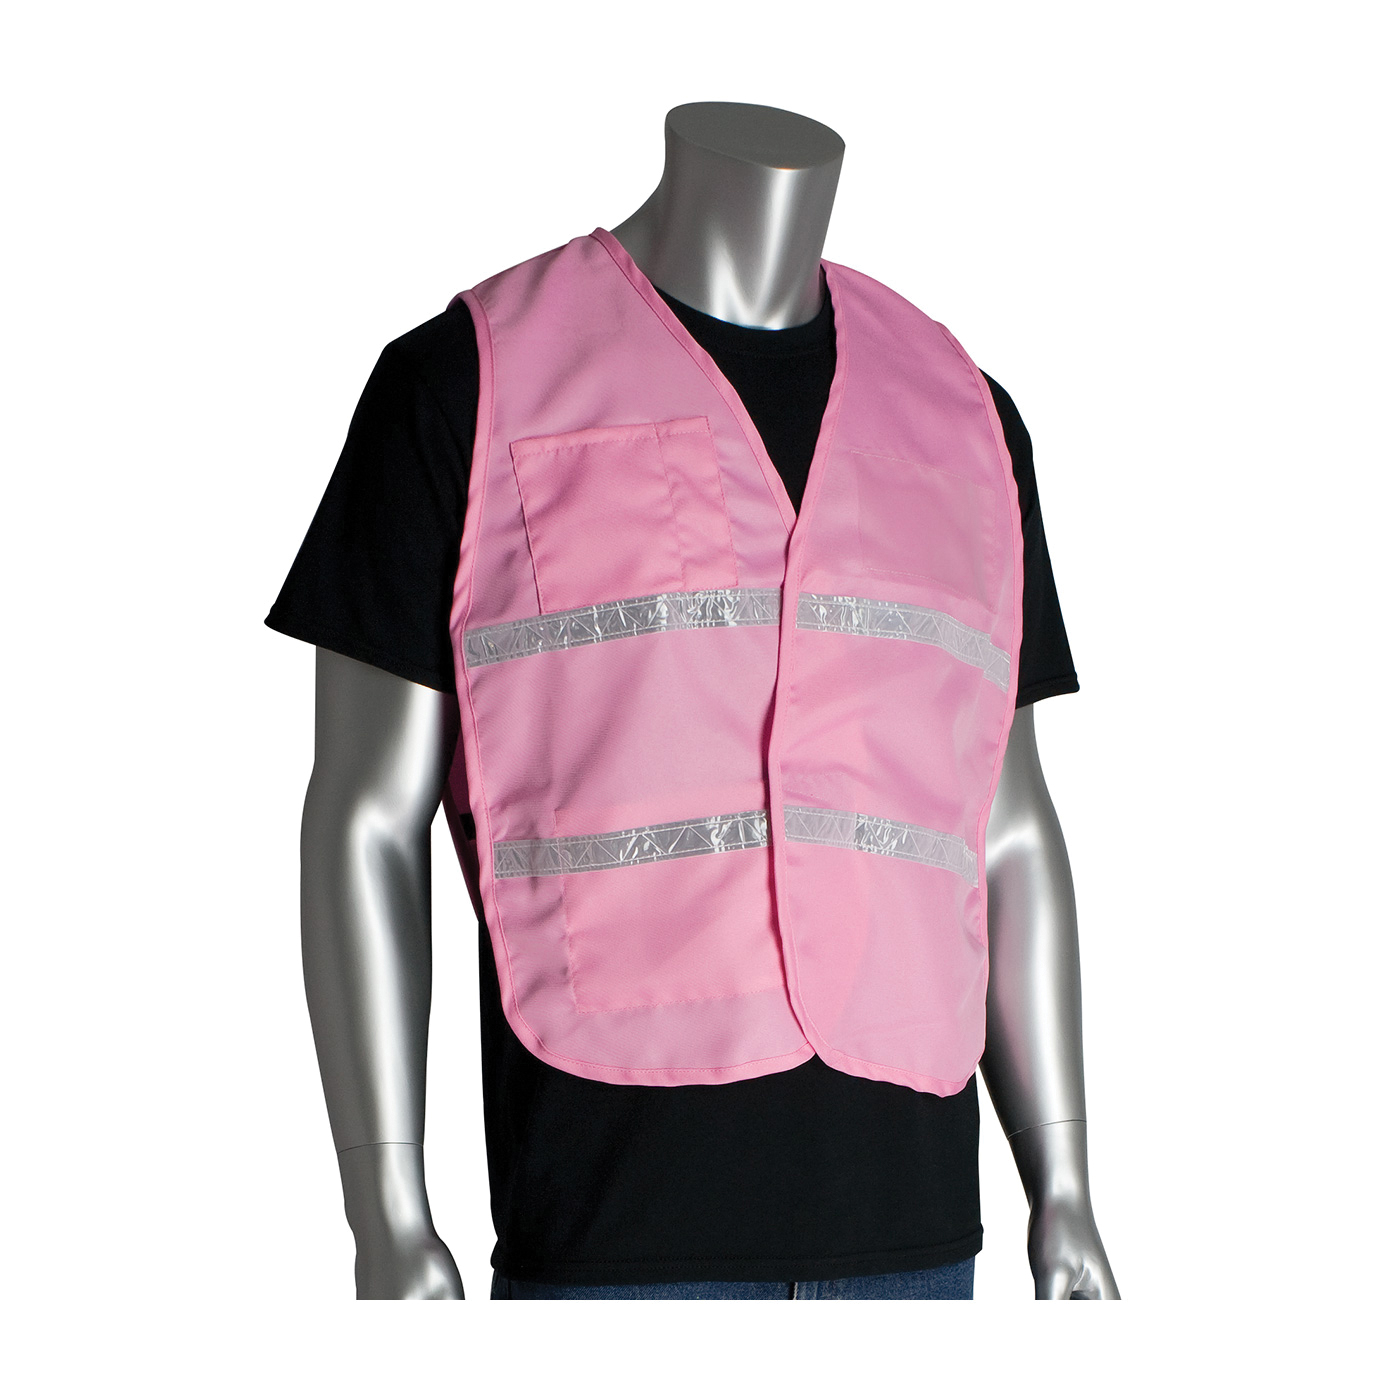 PIP® 300-1516/M-XL Incident Command Vest, M/XL, Pink, Polyester, 42.1 in Chest, Hook and Loop Closure